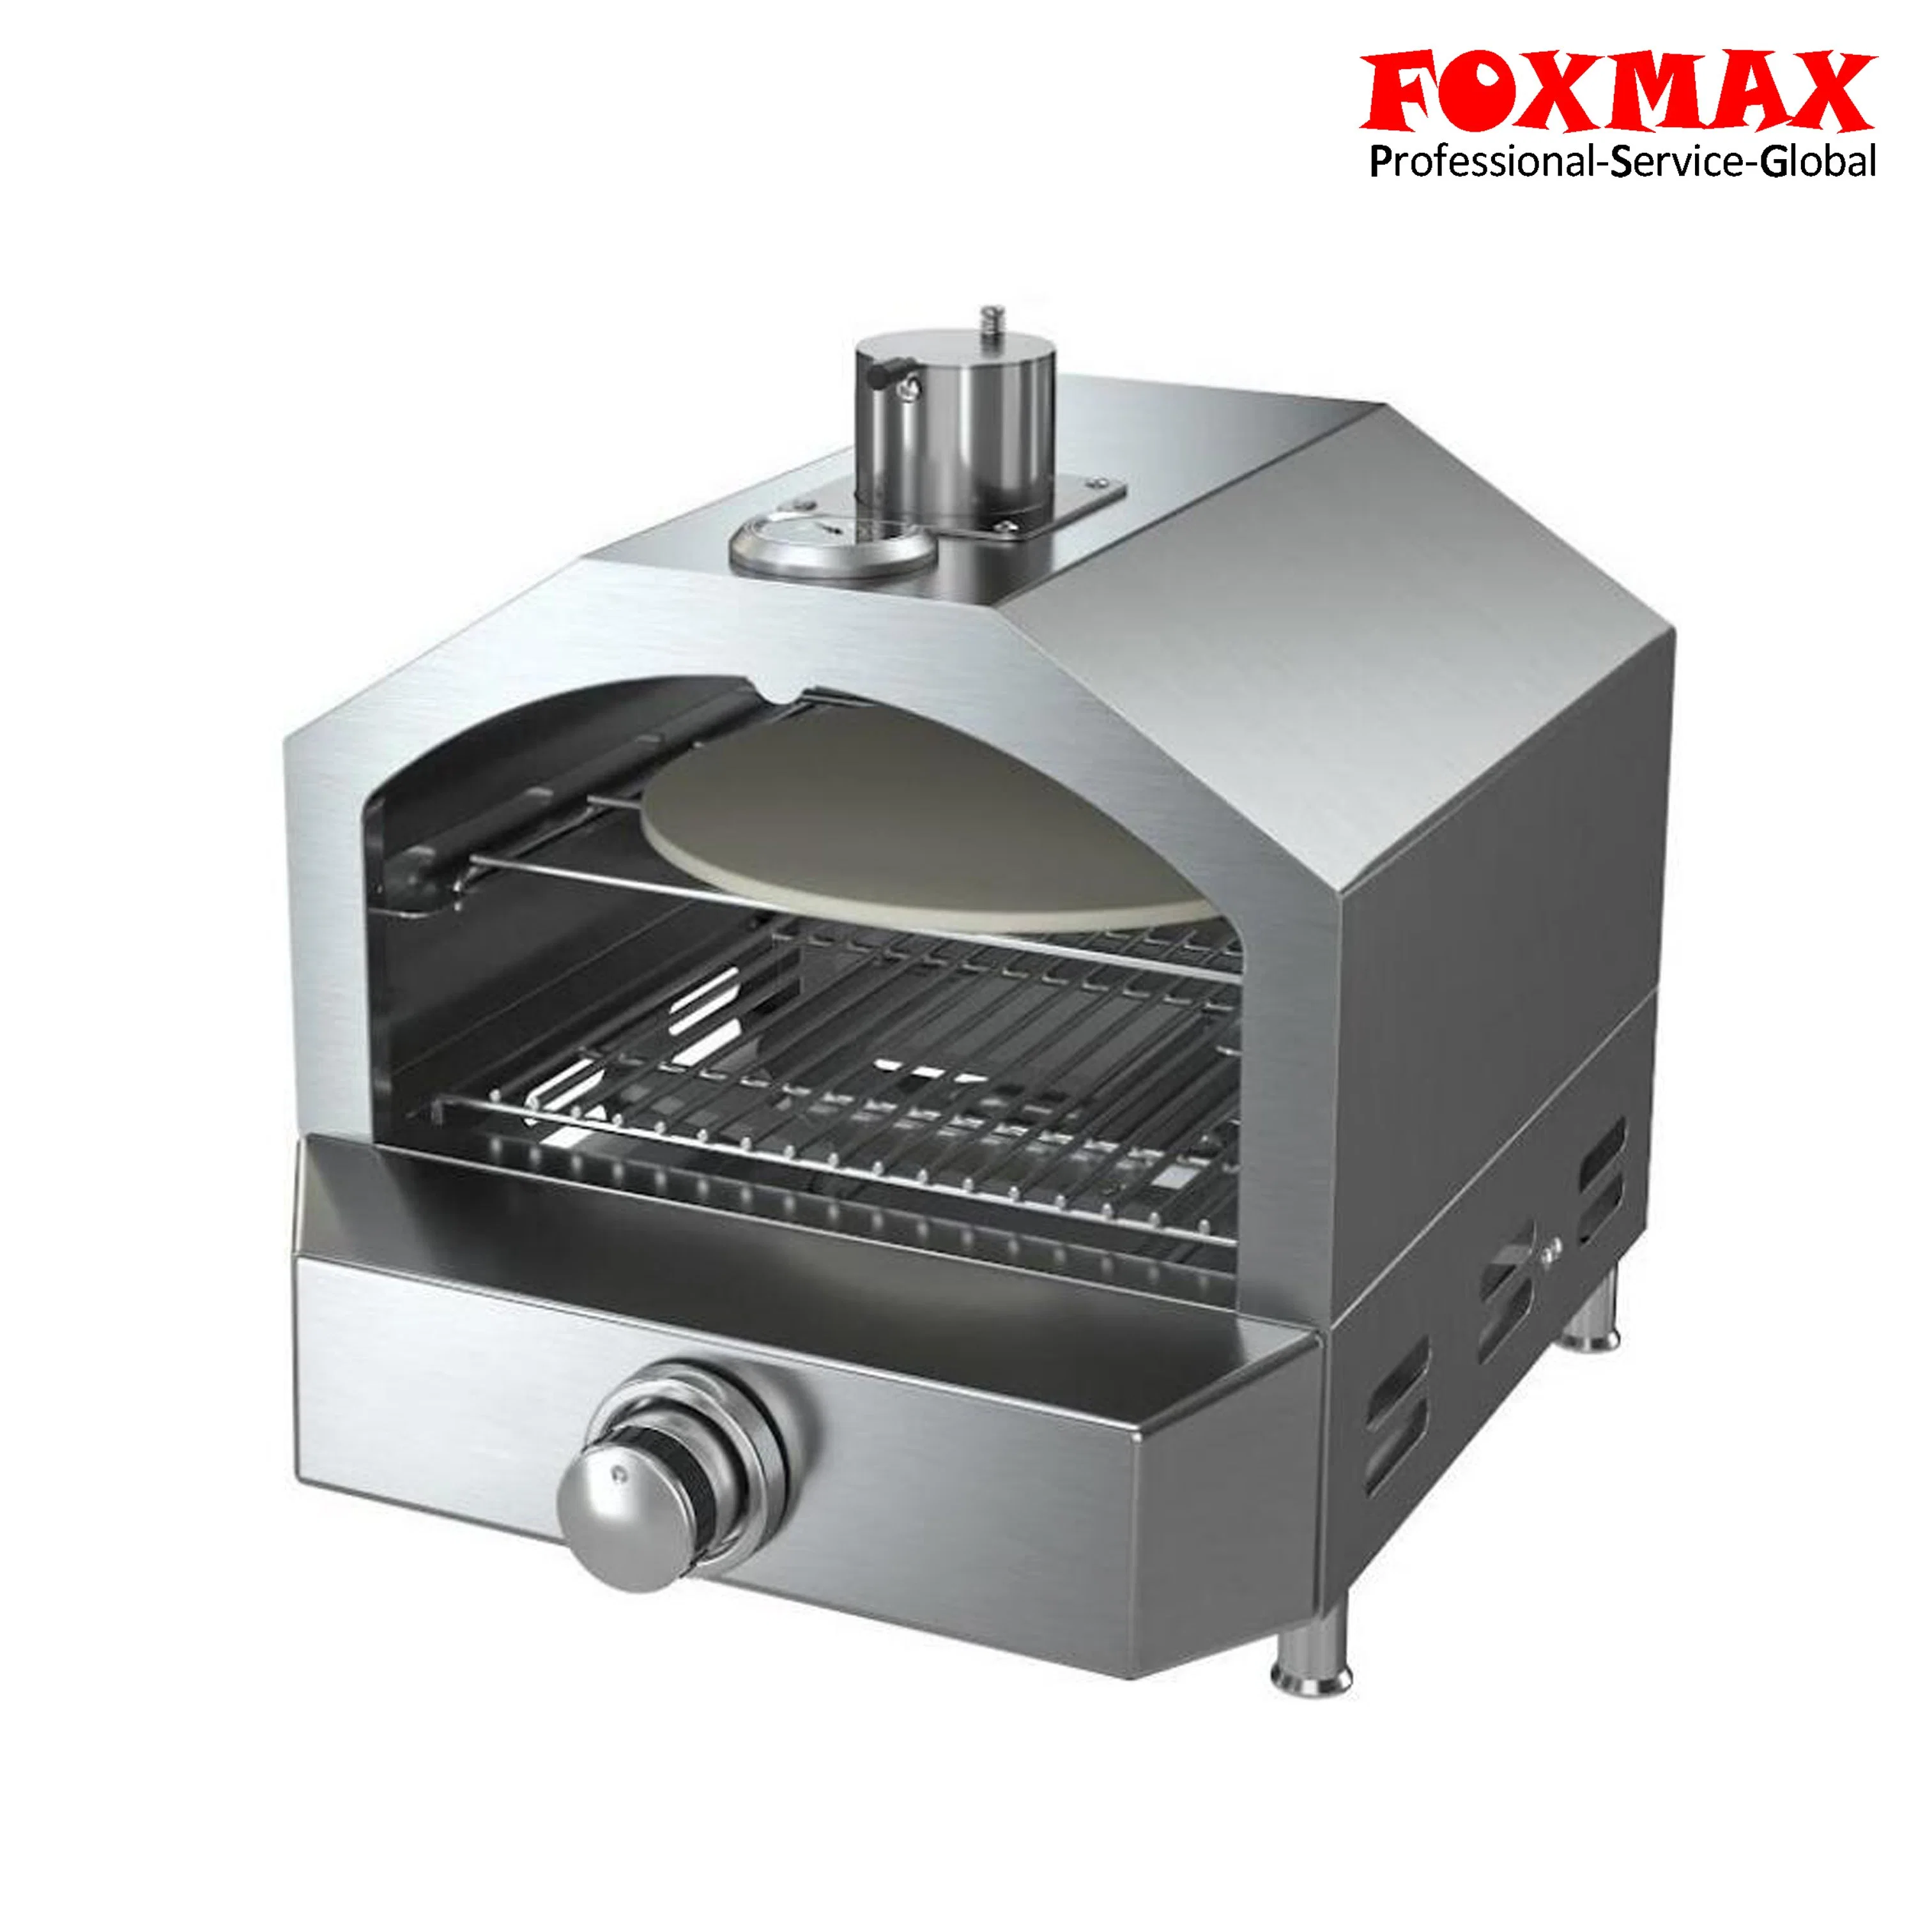 Portable Outdoor Propane Gas BBQ Pizza Oven with Temperature Display (FX-BQ06)